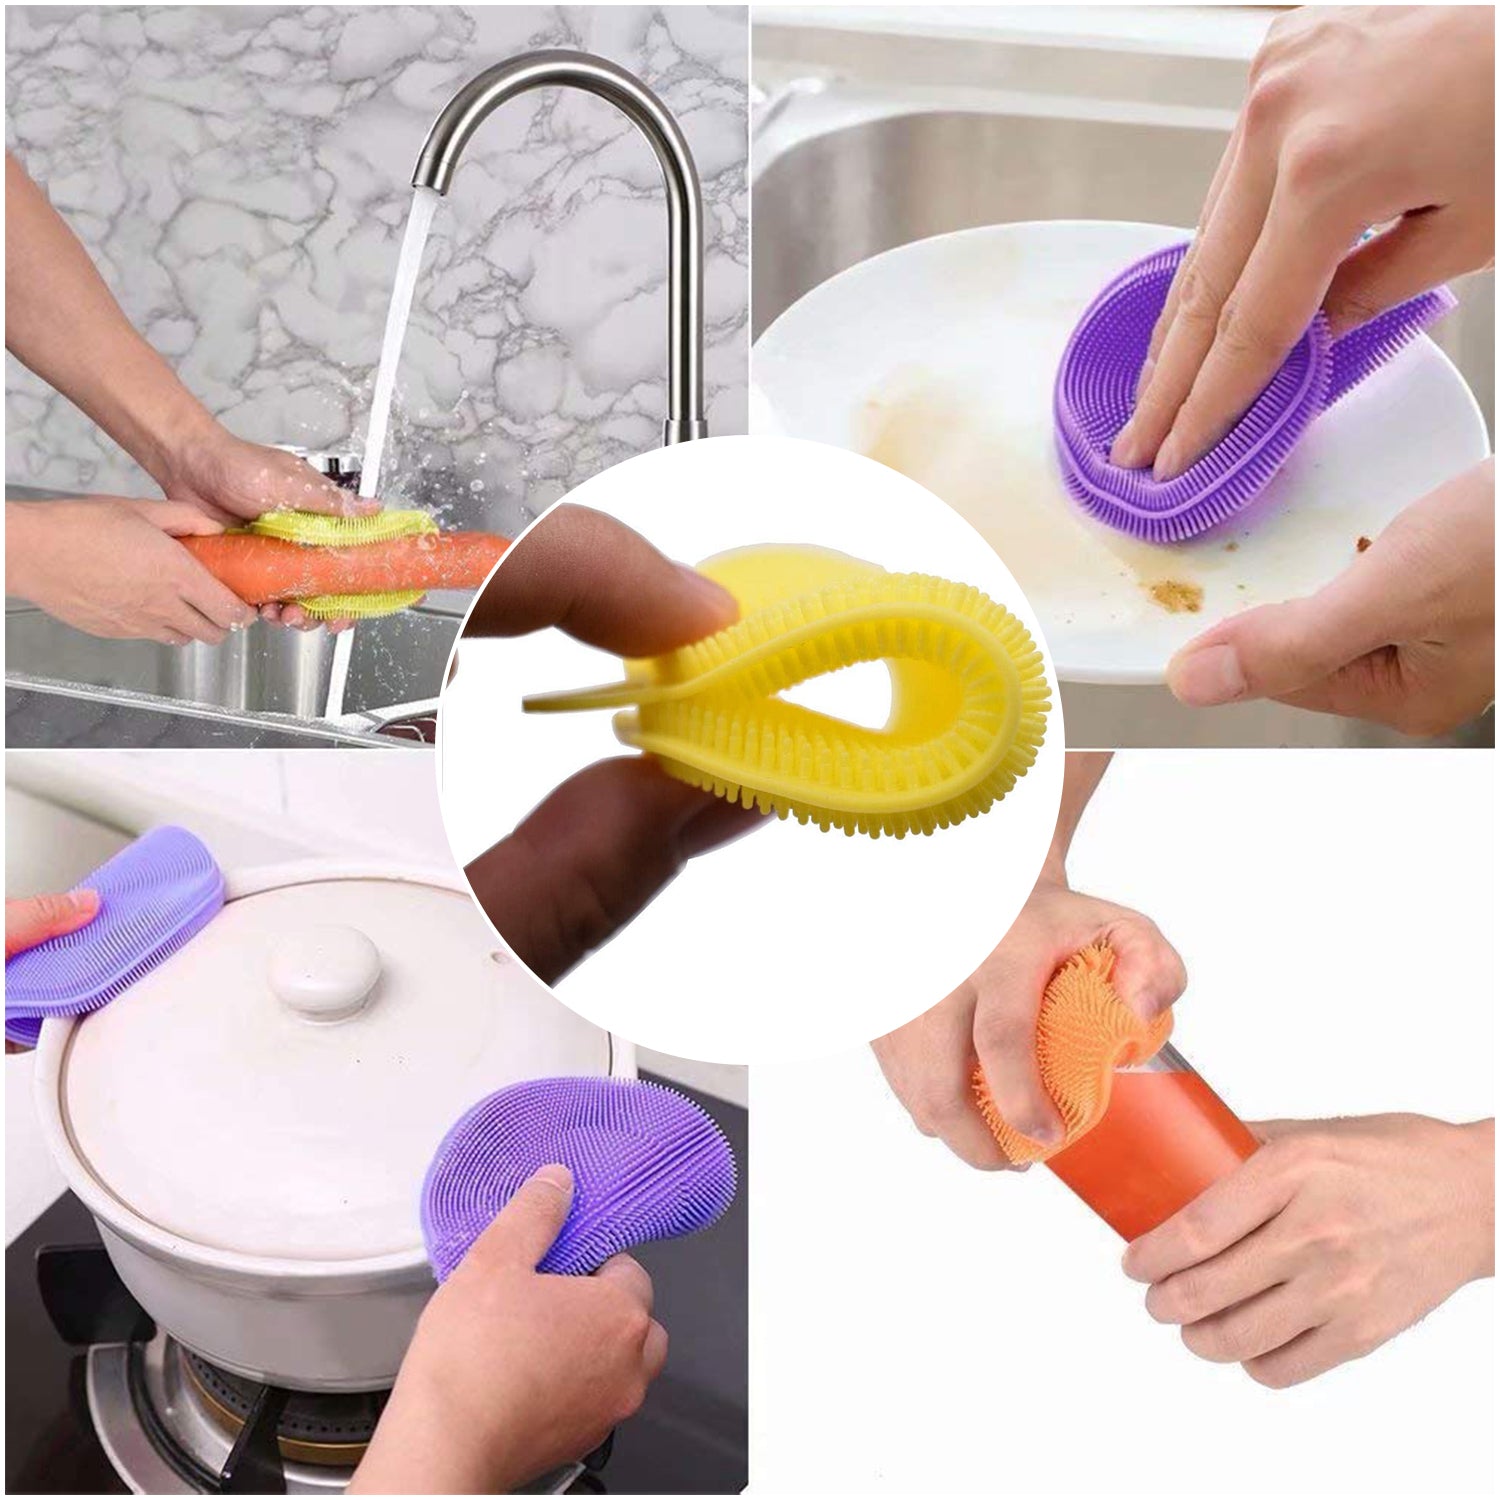 1344A Cleaning Supplies Sponges Silicone Scrubber for Kitchen Non Stick Dishwashing & Baby Care Sponge Brush Household Health Tool( Pack of 5pc). JK Trends